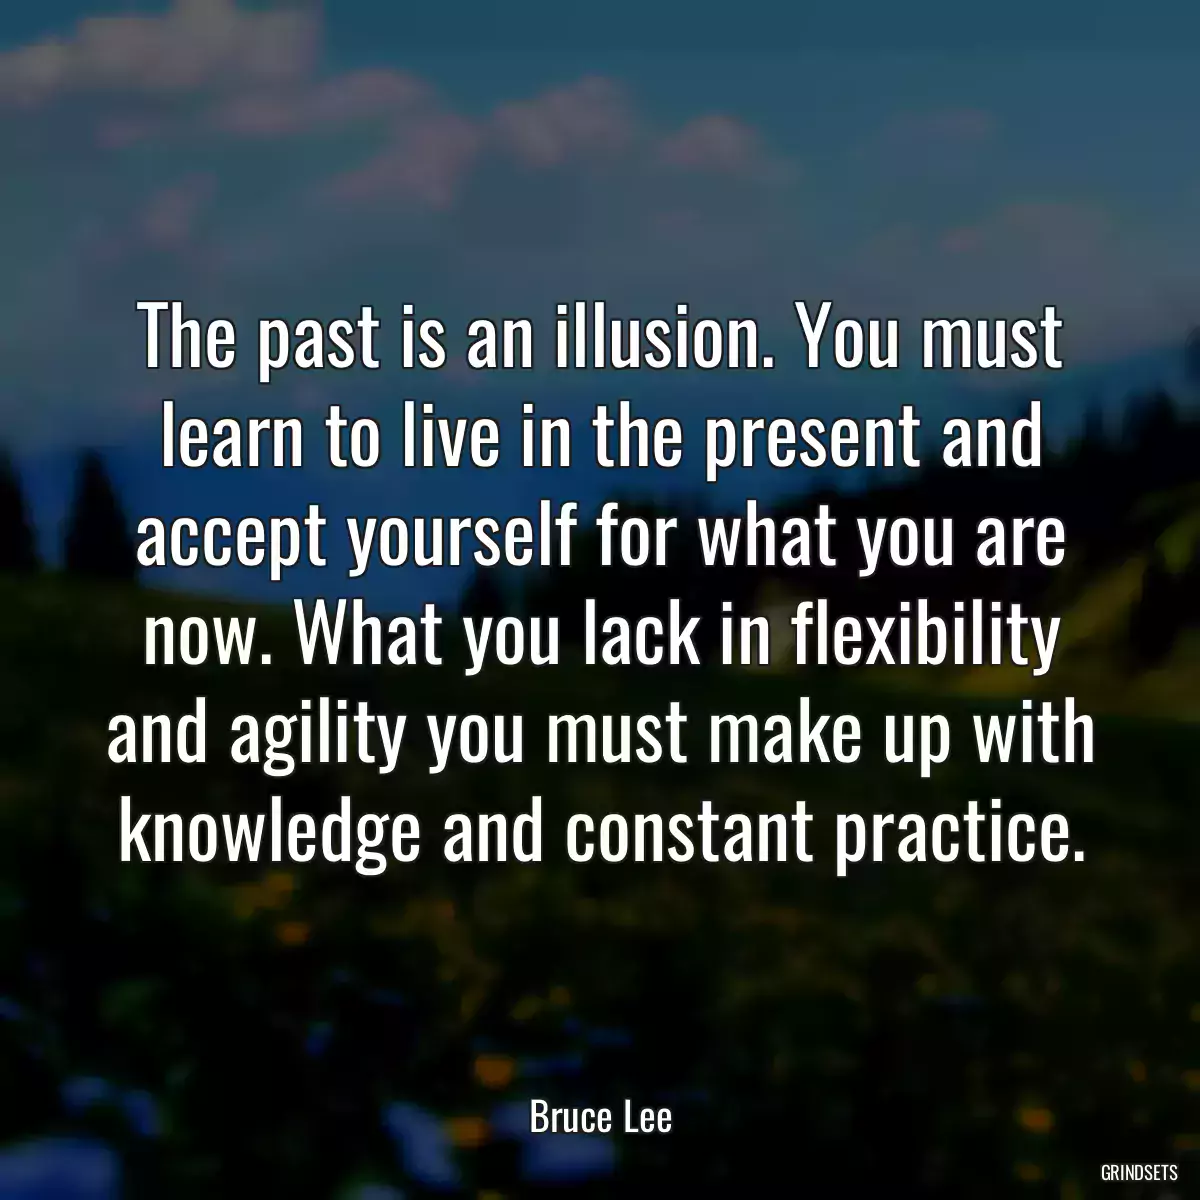 The past is an illusion. You must learn to live in the present and accept yourself for what you are now. What you lack in flexibility and agility you must make up with knowledge and constant practice.